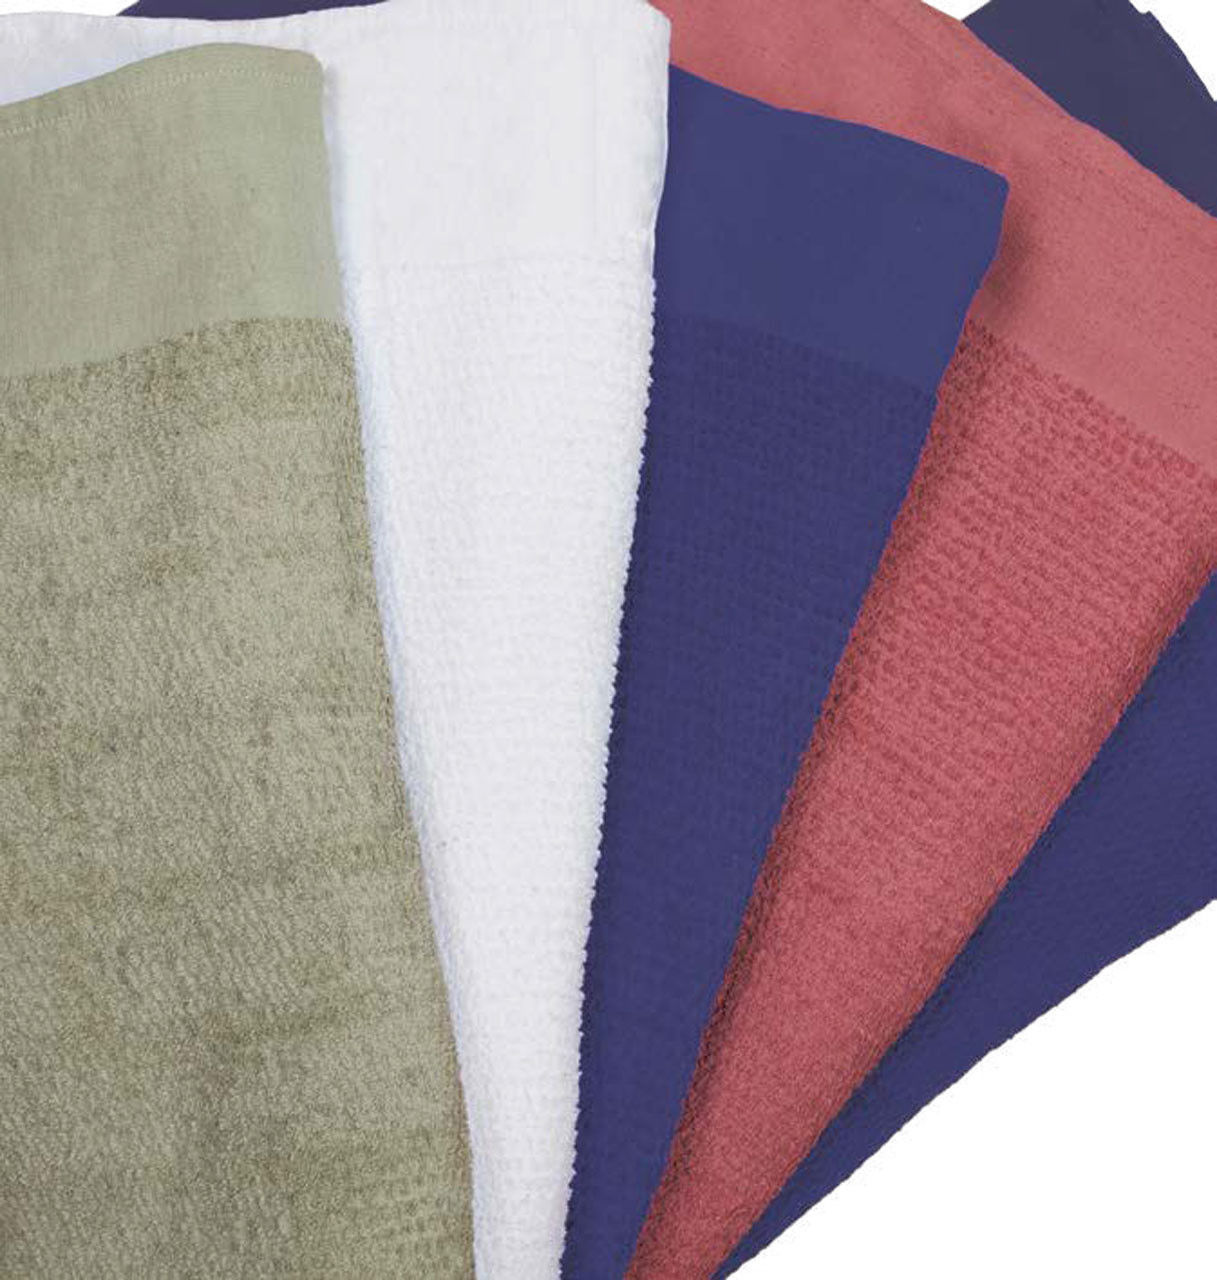 What material is used for Terry Hospital Blankets, specifically the terry cloth blanket?